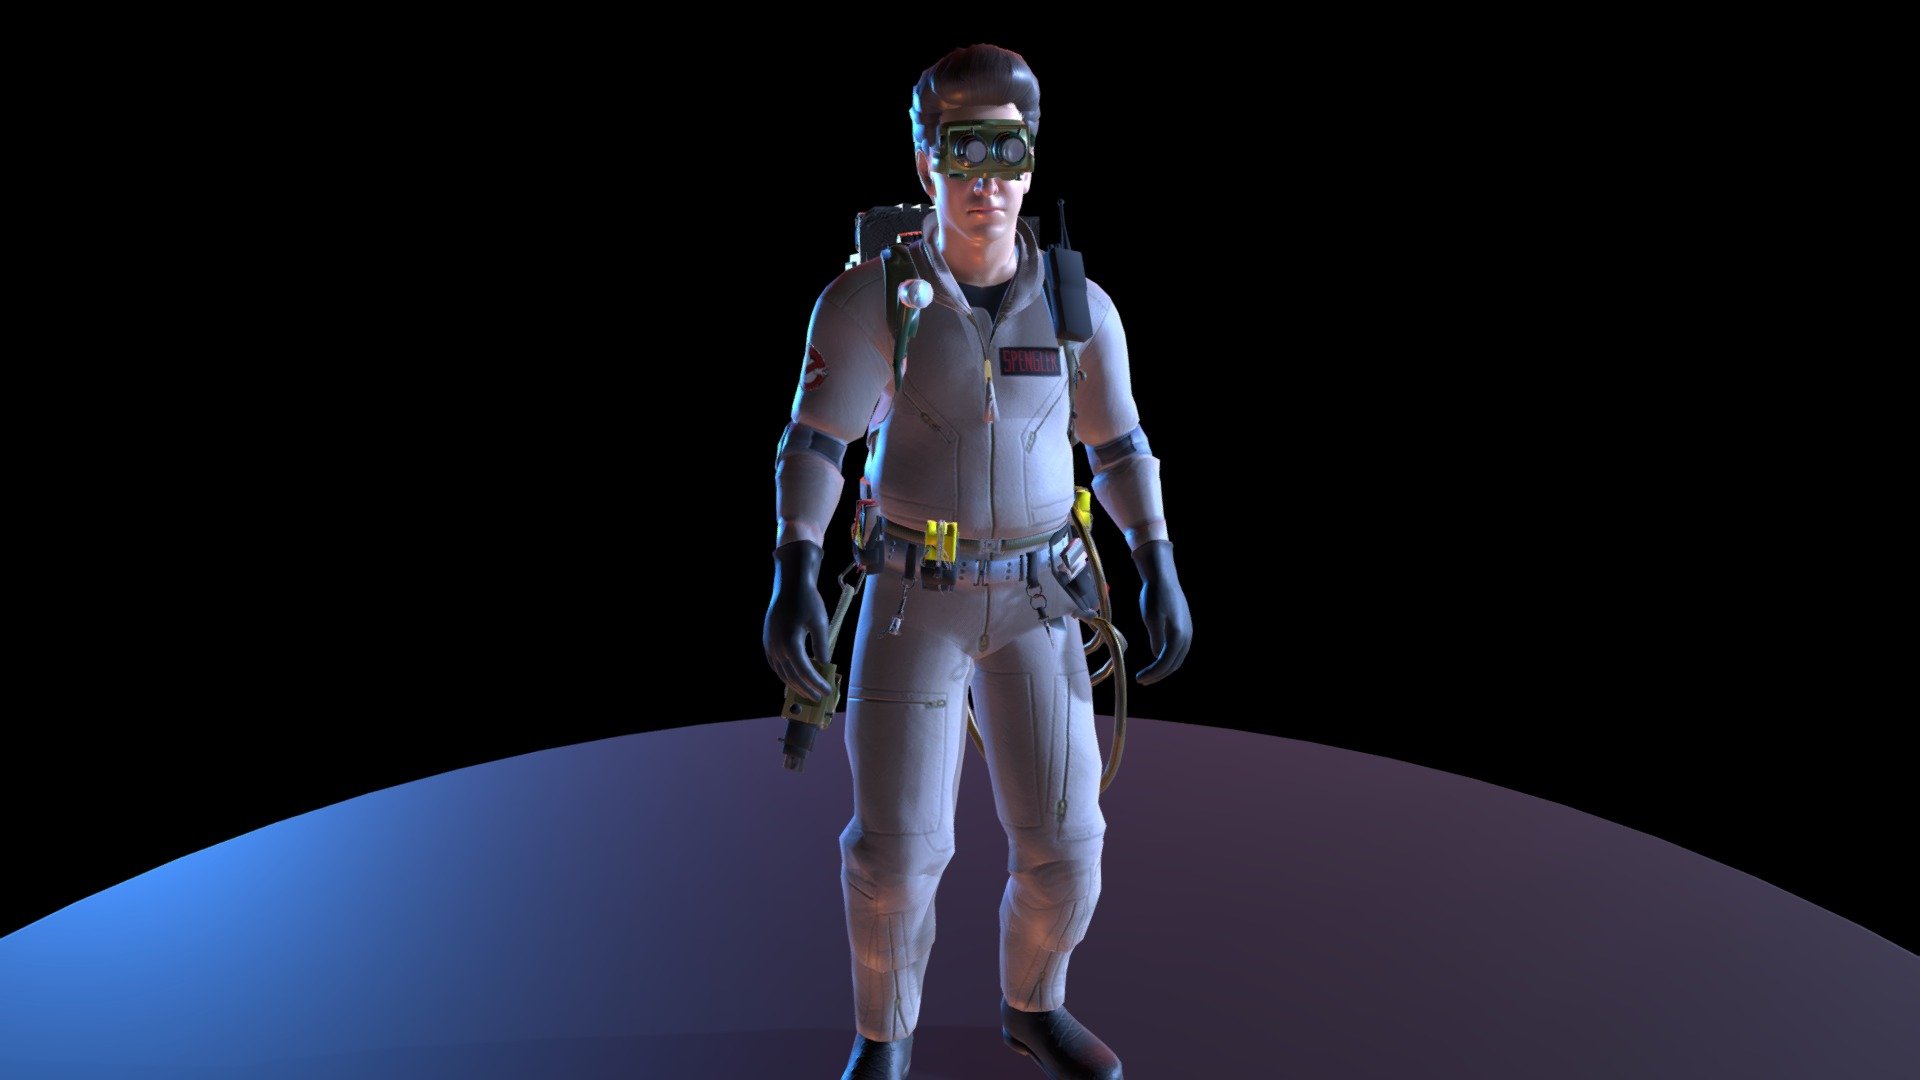 Ghostbuster Dr. Egon Spengler scanning the environment with his Ecto-goggles. Animated/designed in Cinema4D 3d model